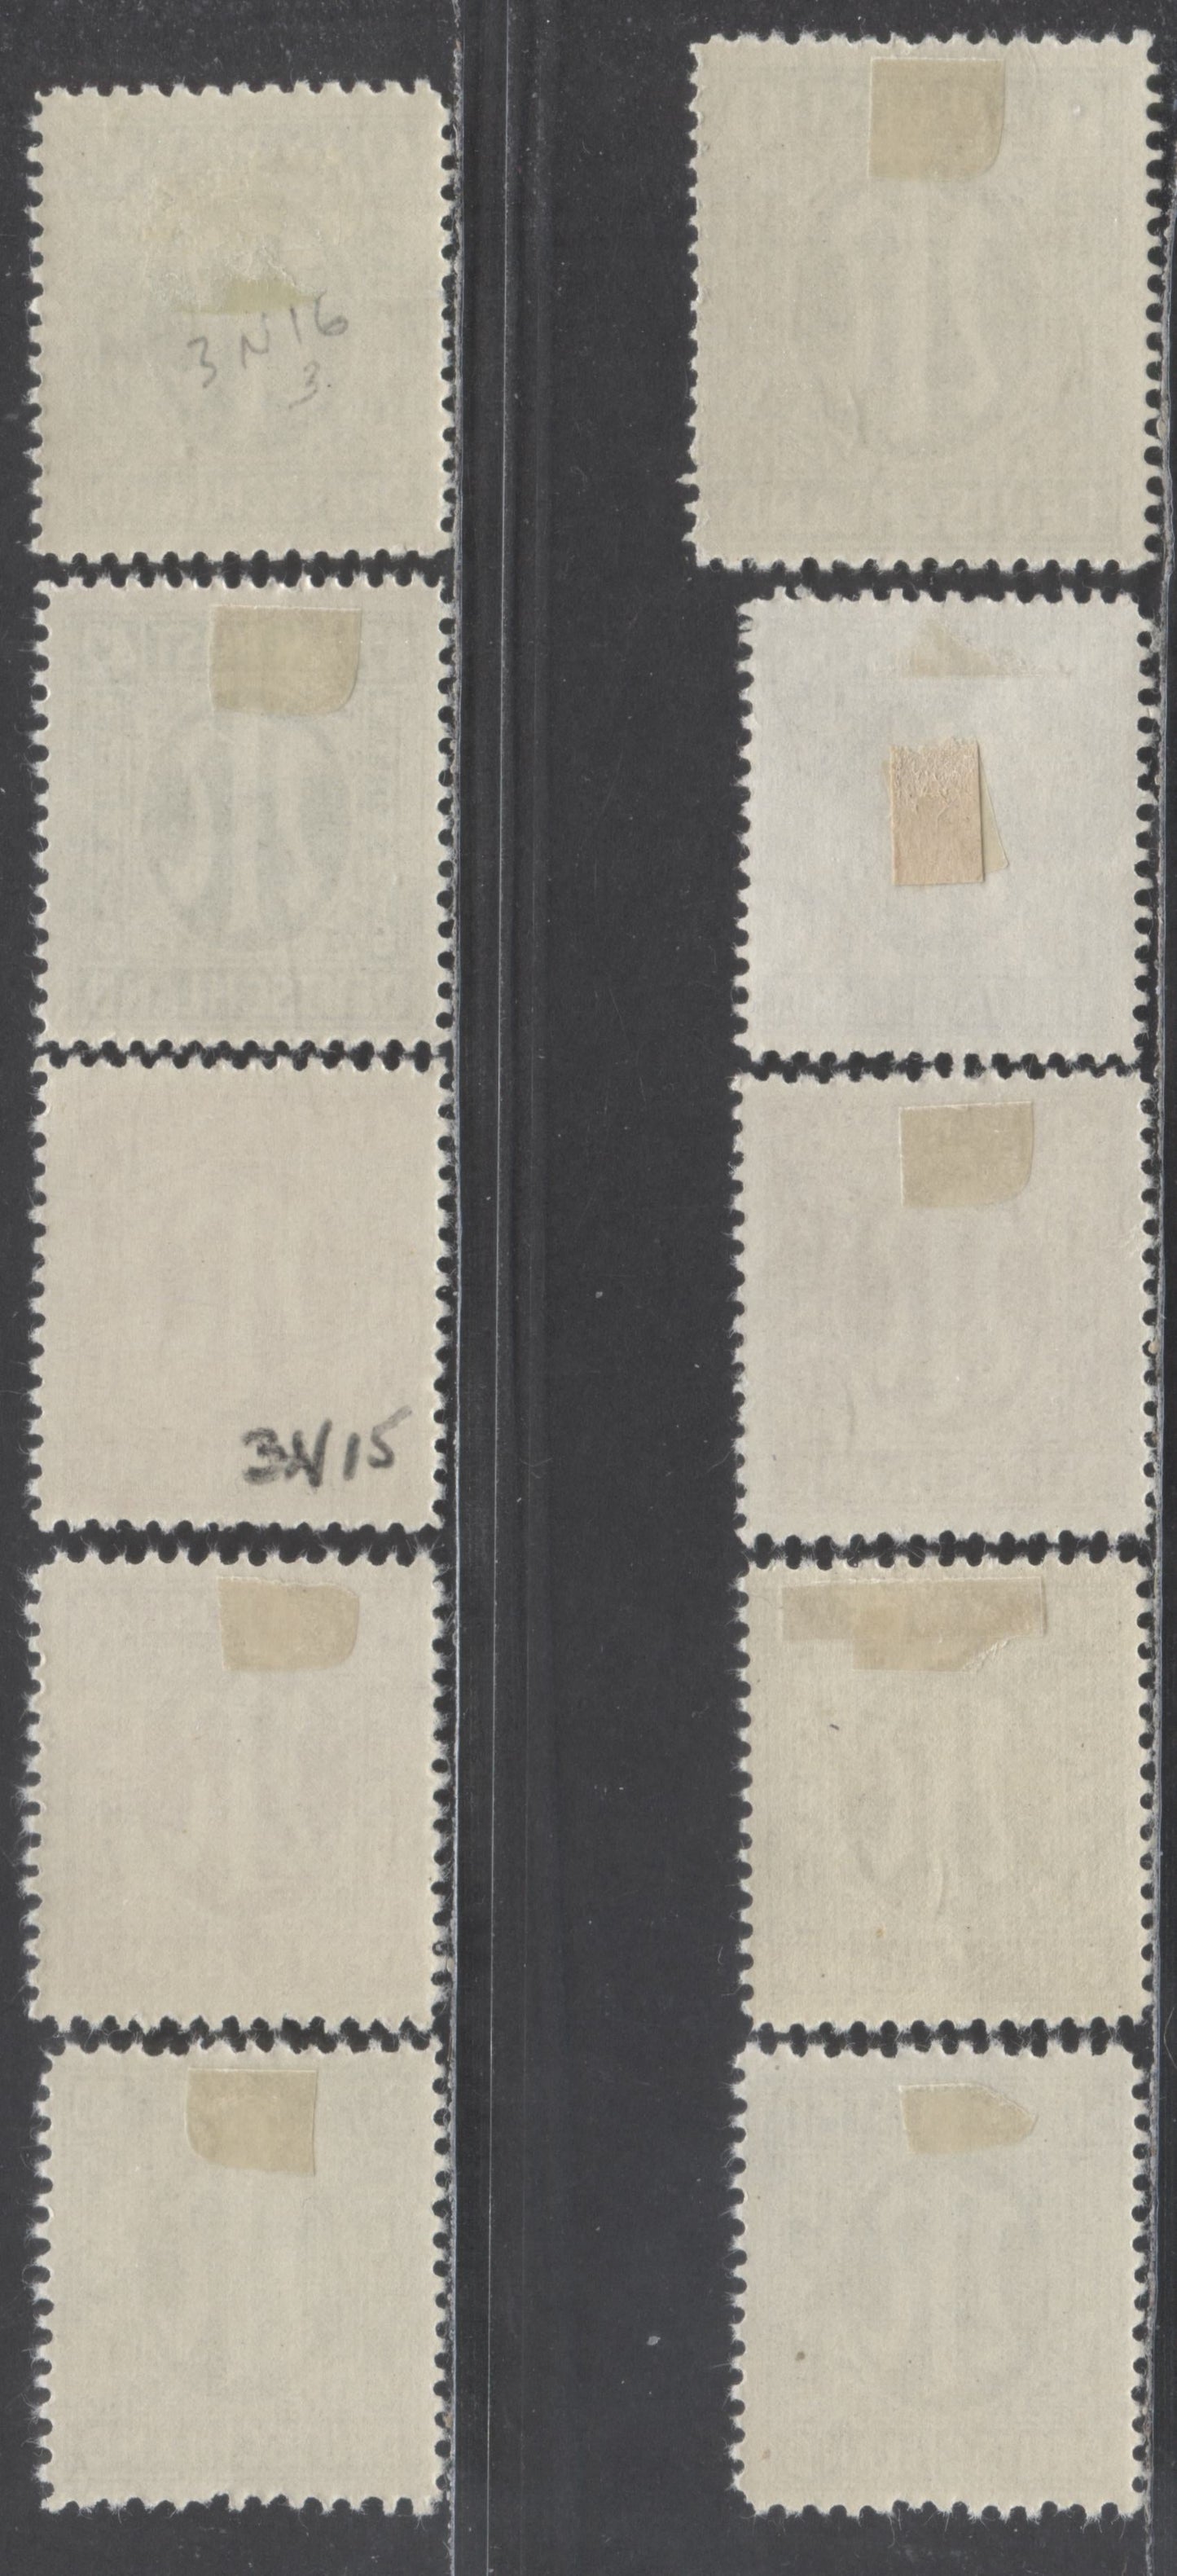 Lot 69 Germany SC#3N14-3N20 1945-1946 A.M.G Issue, Perf 11, 11.5, Medium Paper With White Gum That Can Be Dull & Streaky, 80pf Without Gum, Type III, Brunswick Printing, 10 F/VFOG/NH Singles, Estimated Value $9 USD